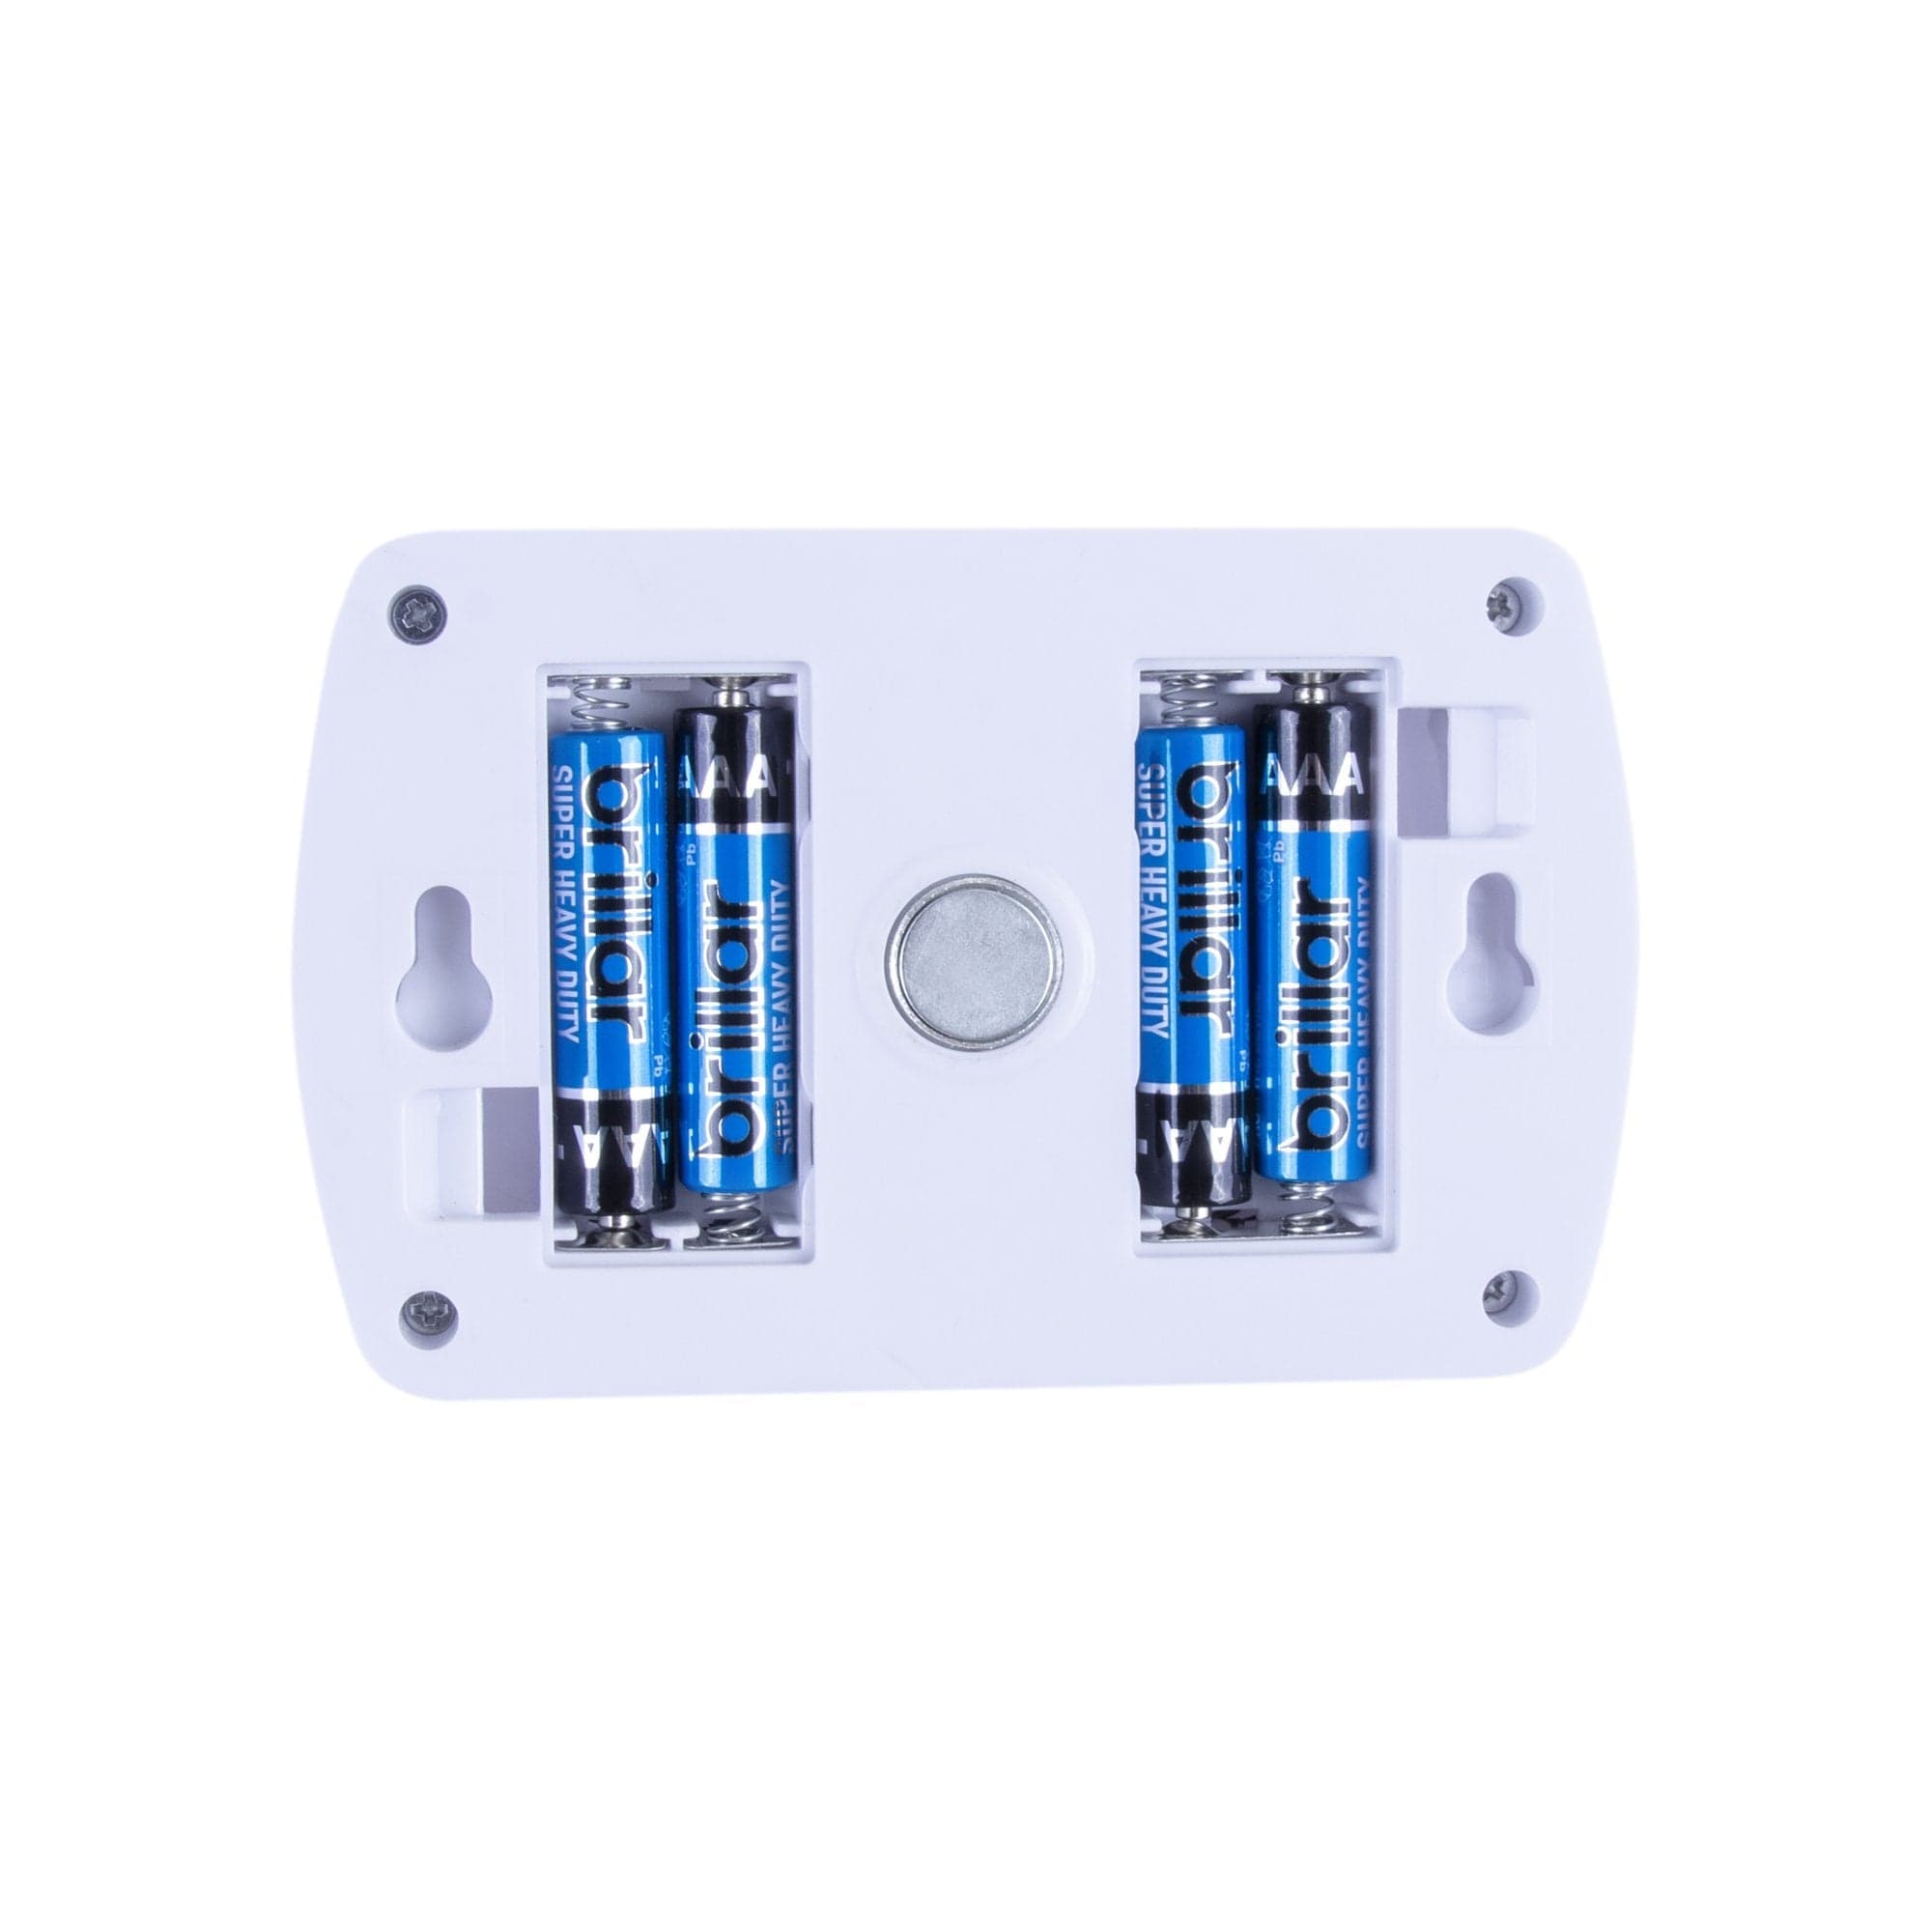 Brillar Electrical Remote Controlled Light Switch BR0021